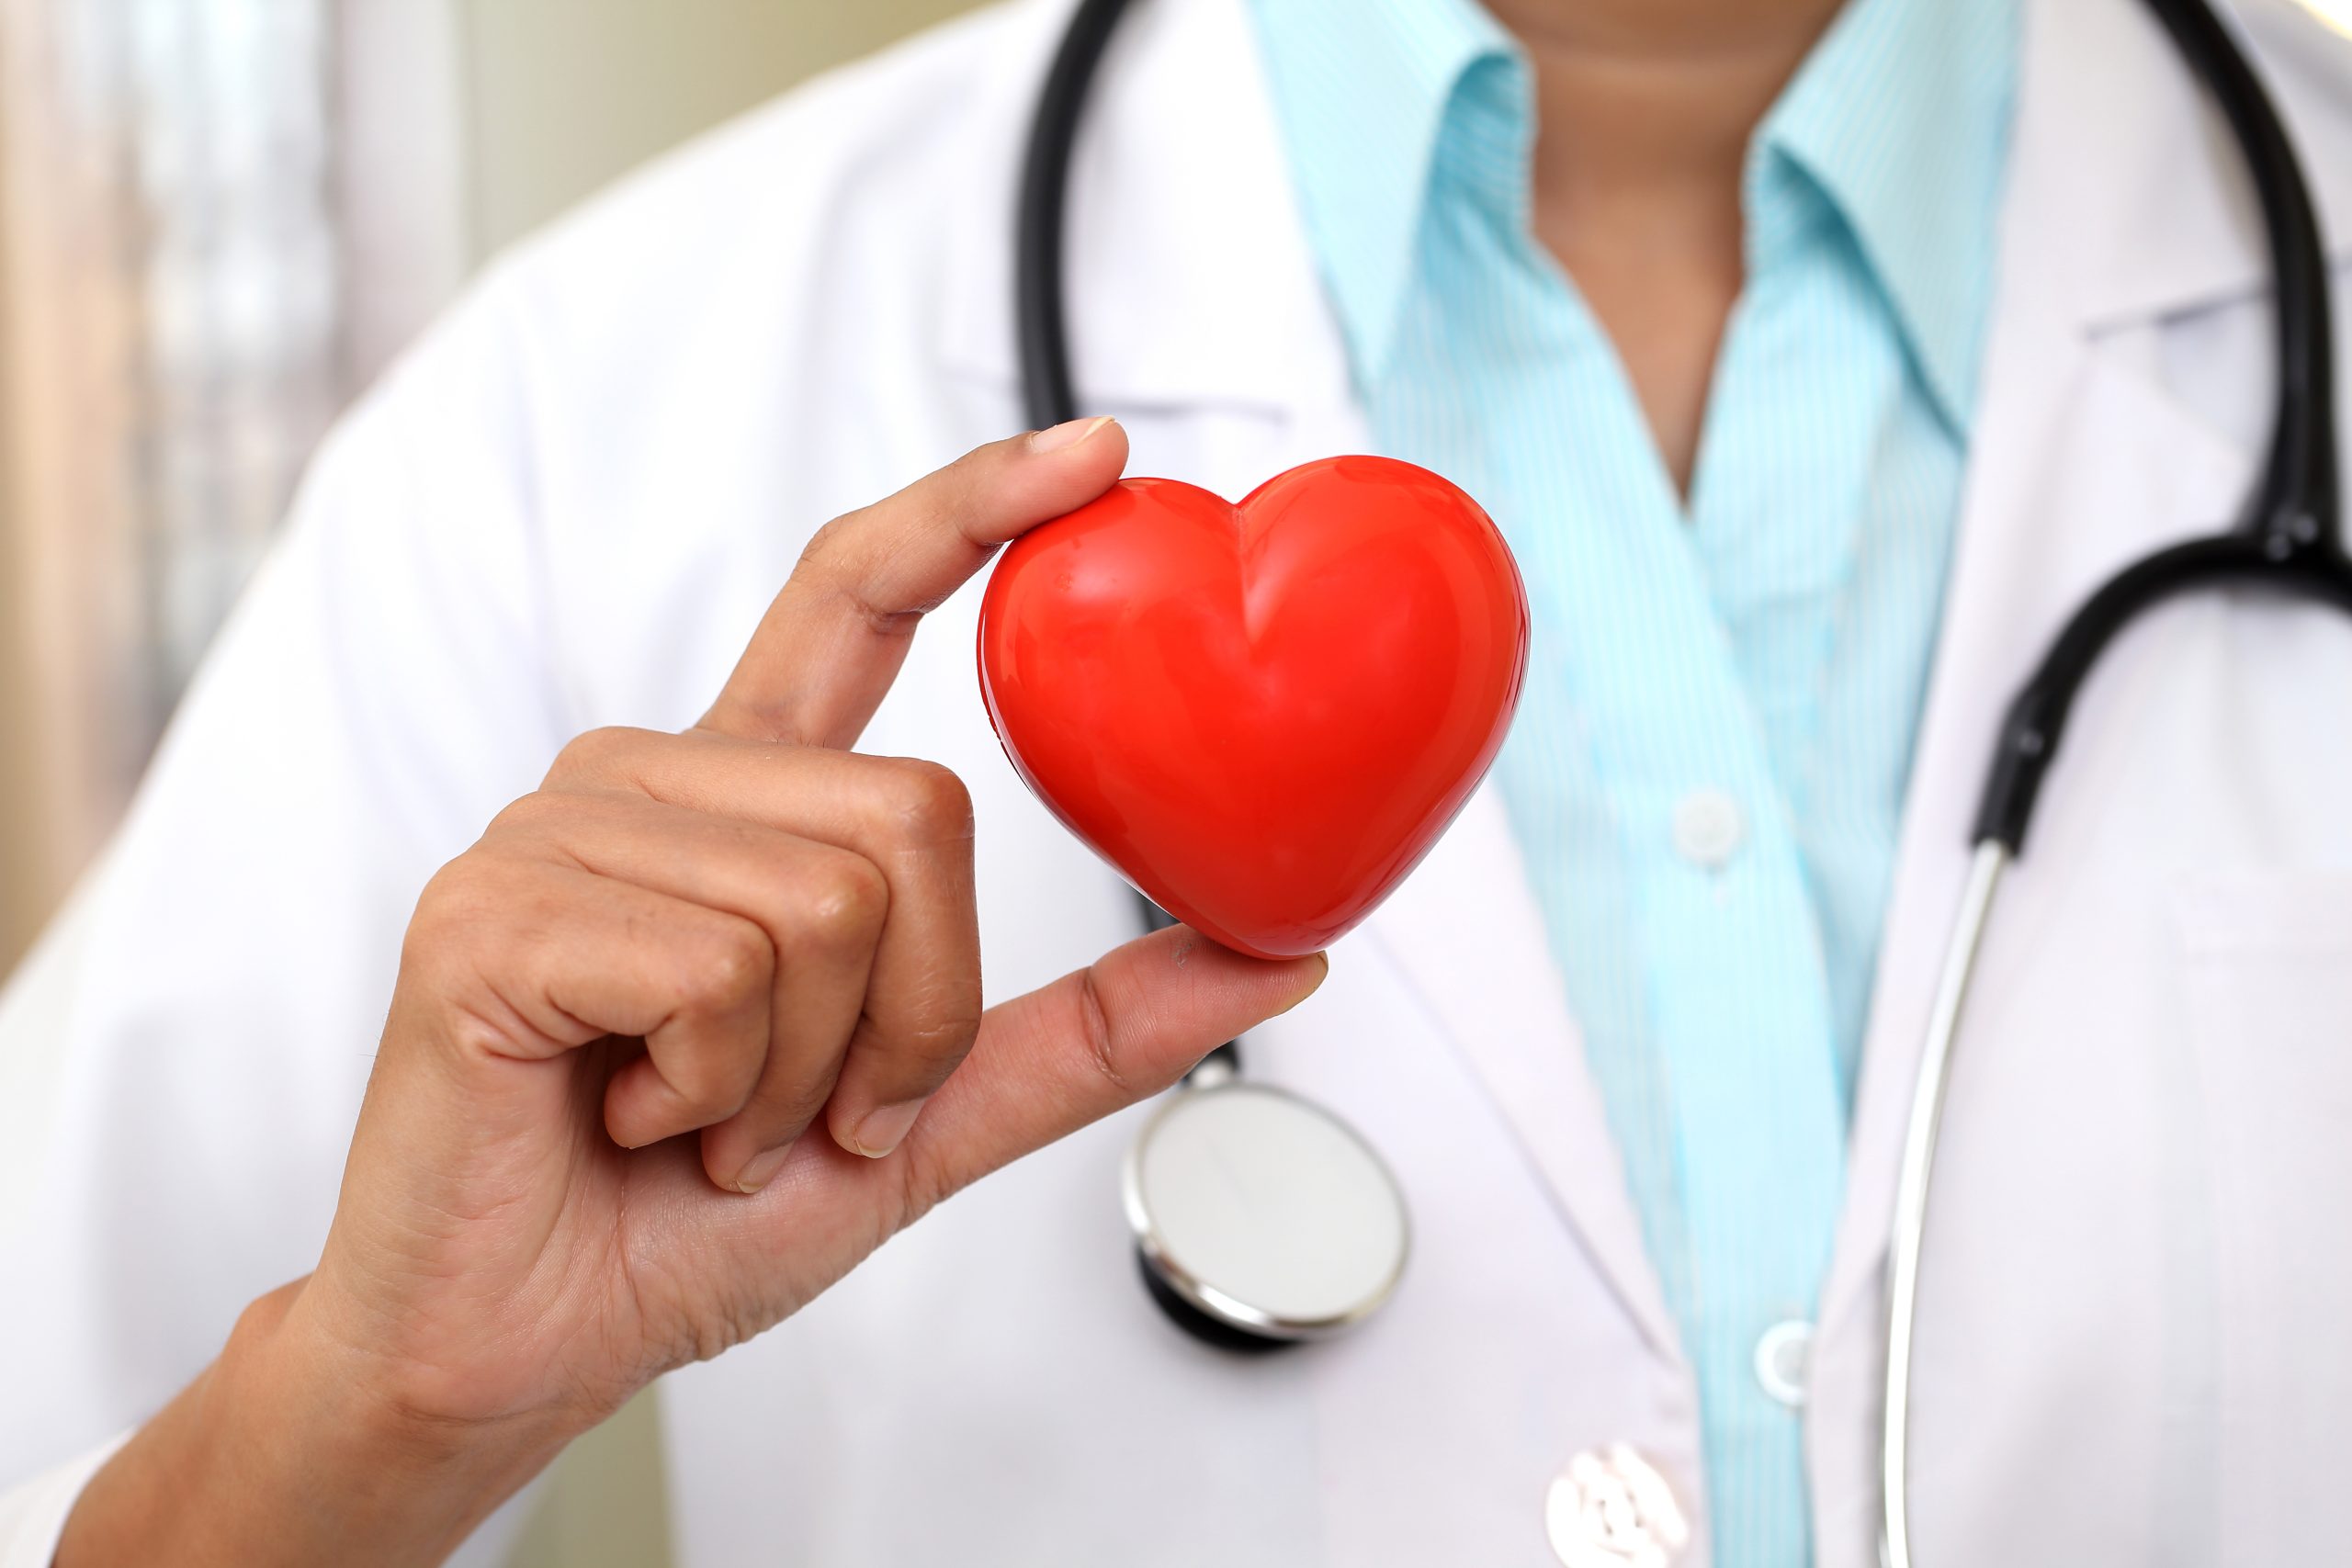 5 Simple Tips for a Healthier Heart